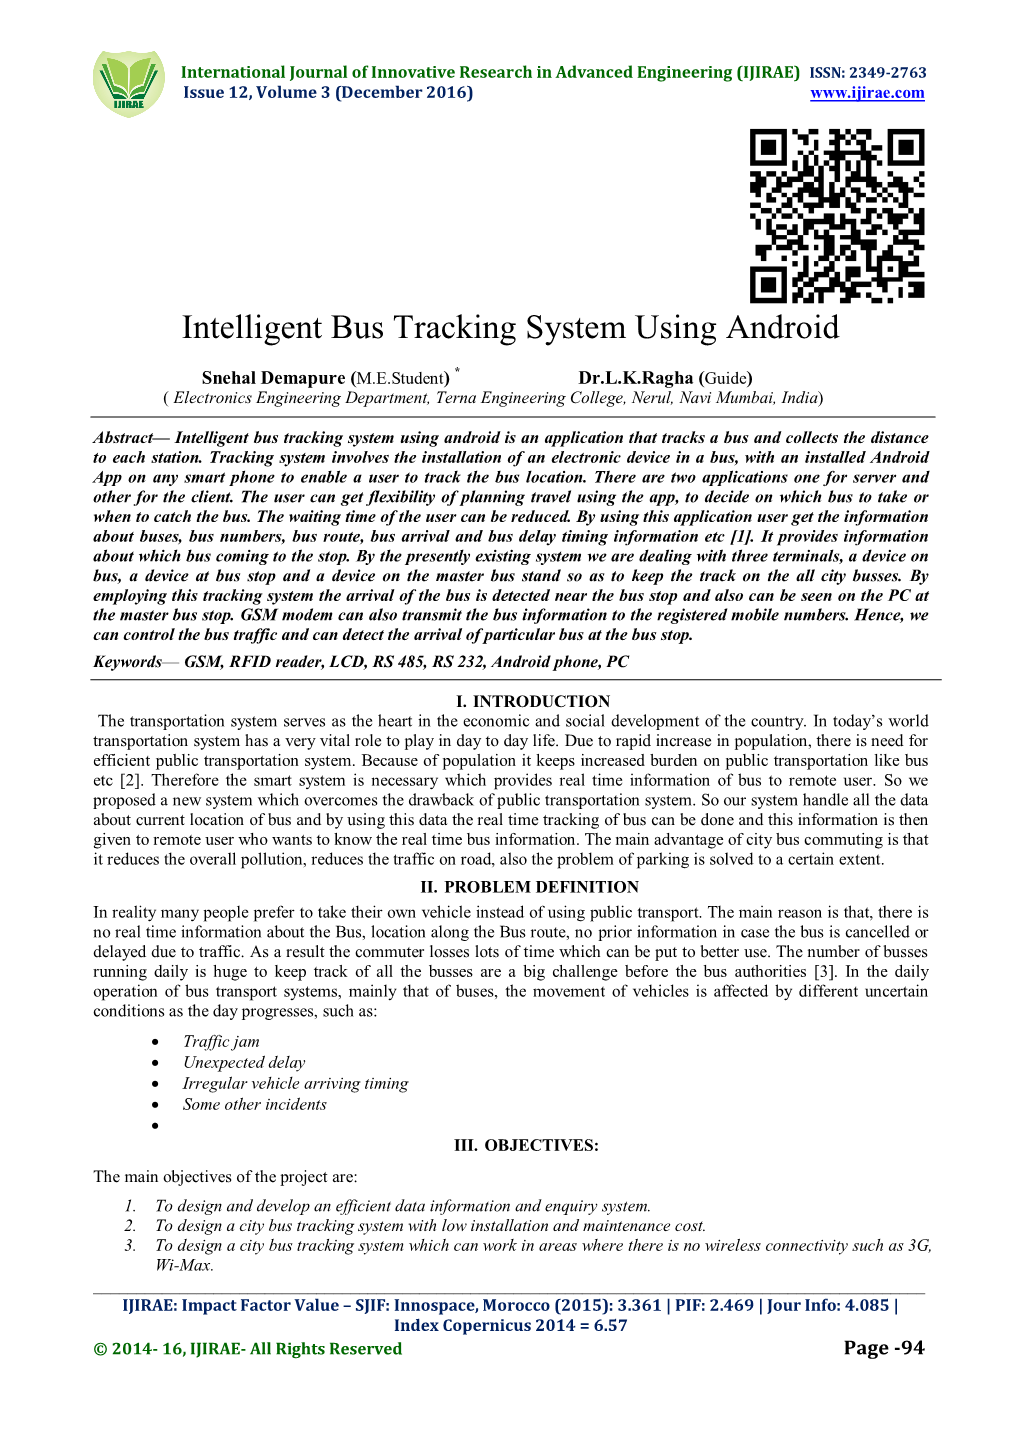 Intelligent Bus Tracking System Using Android